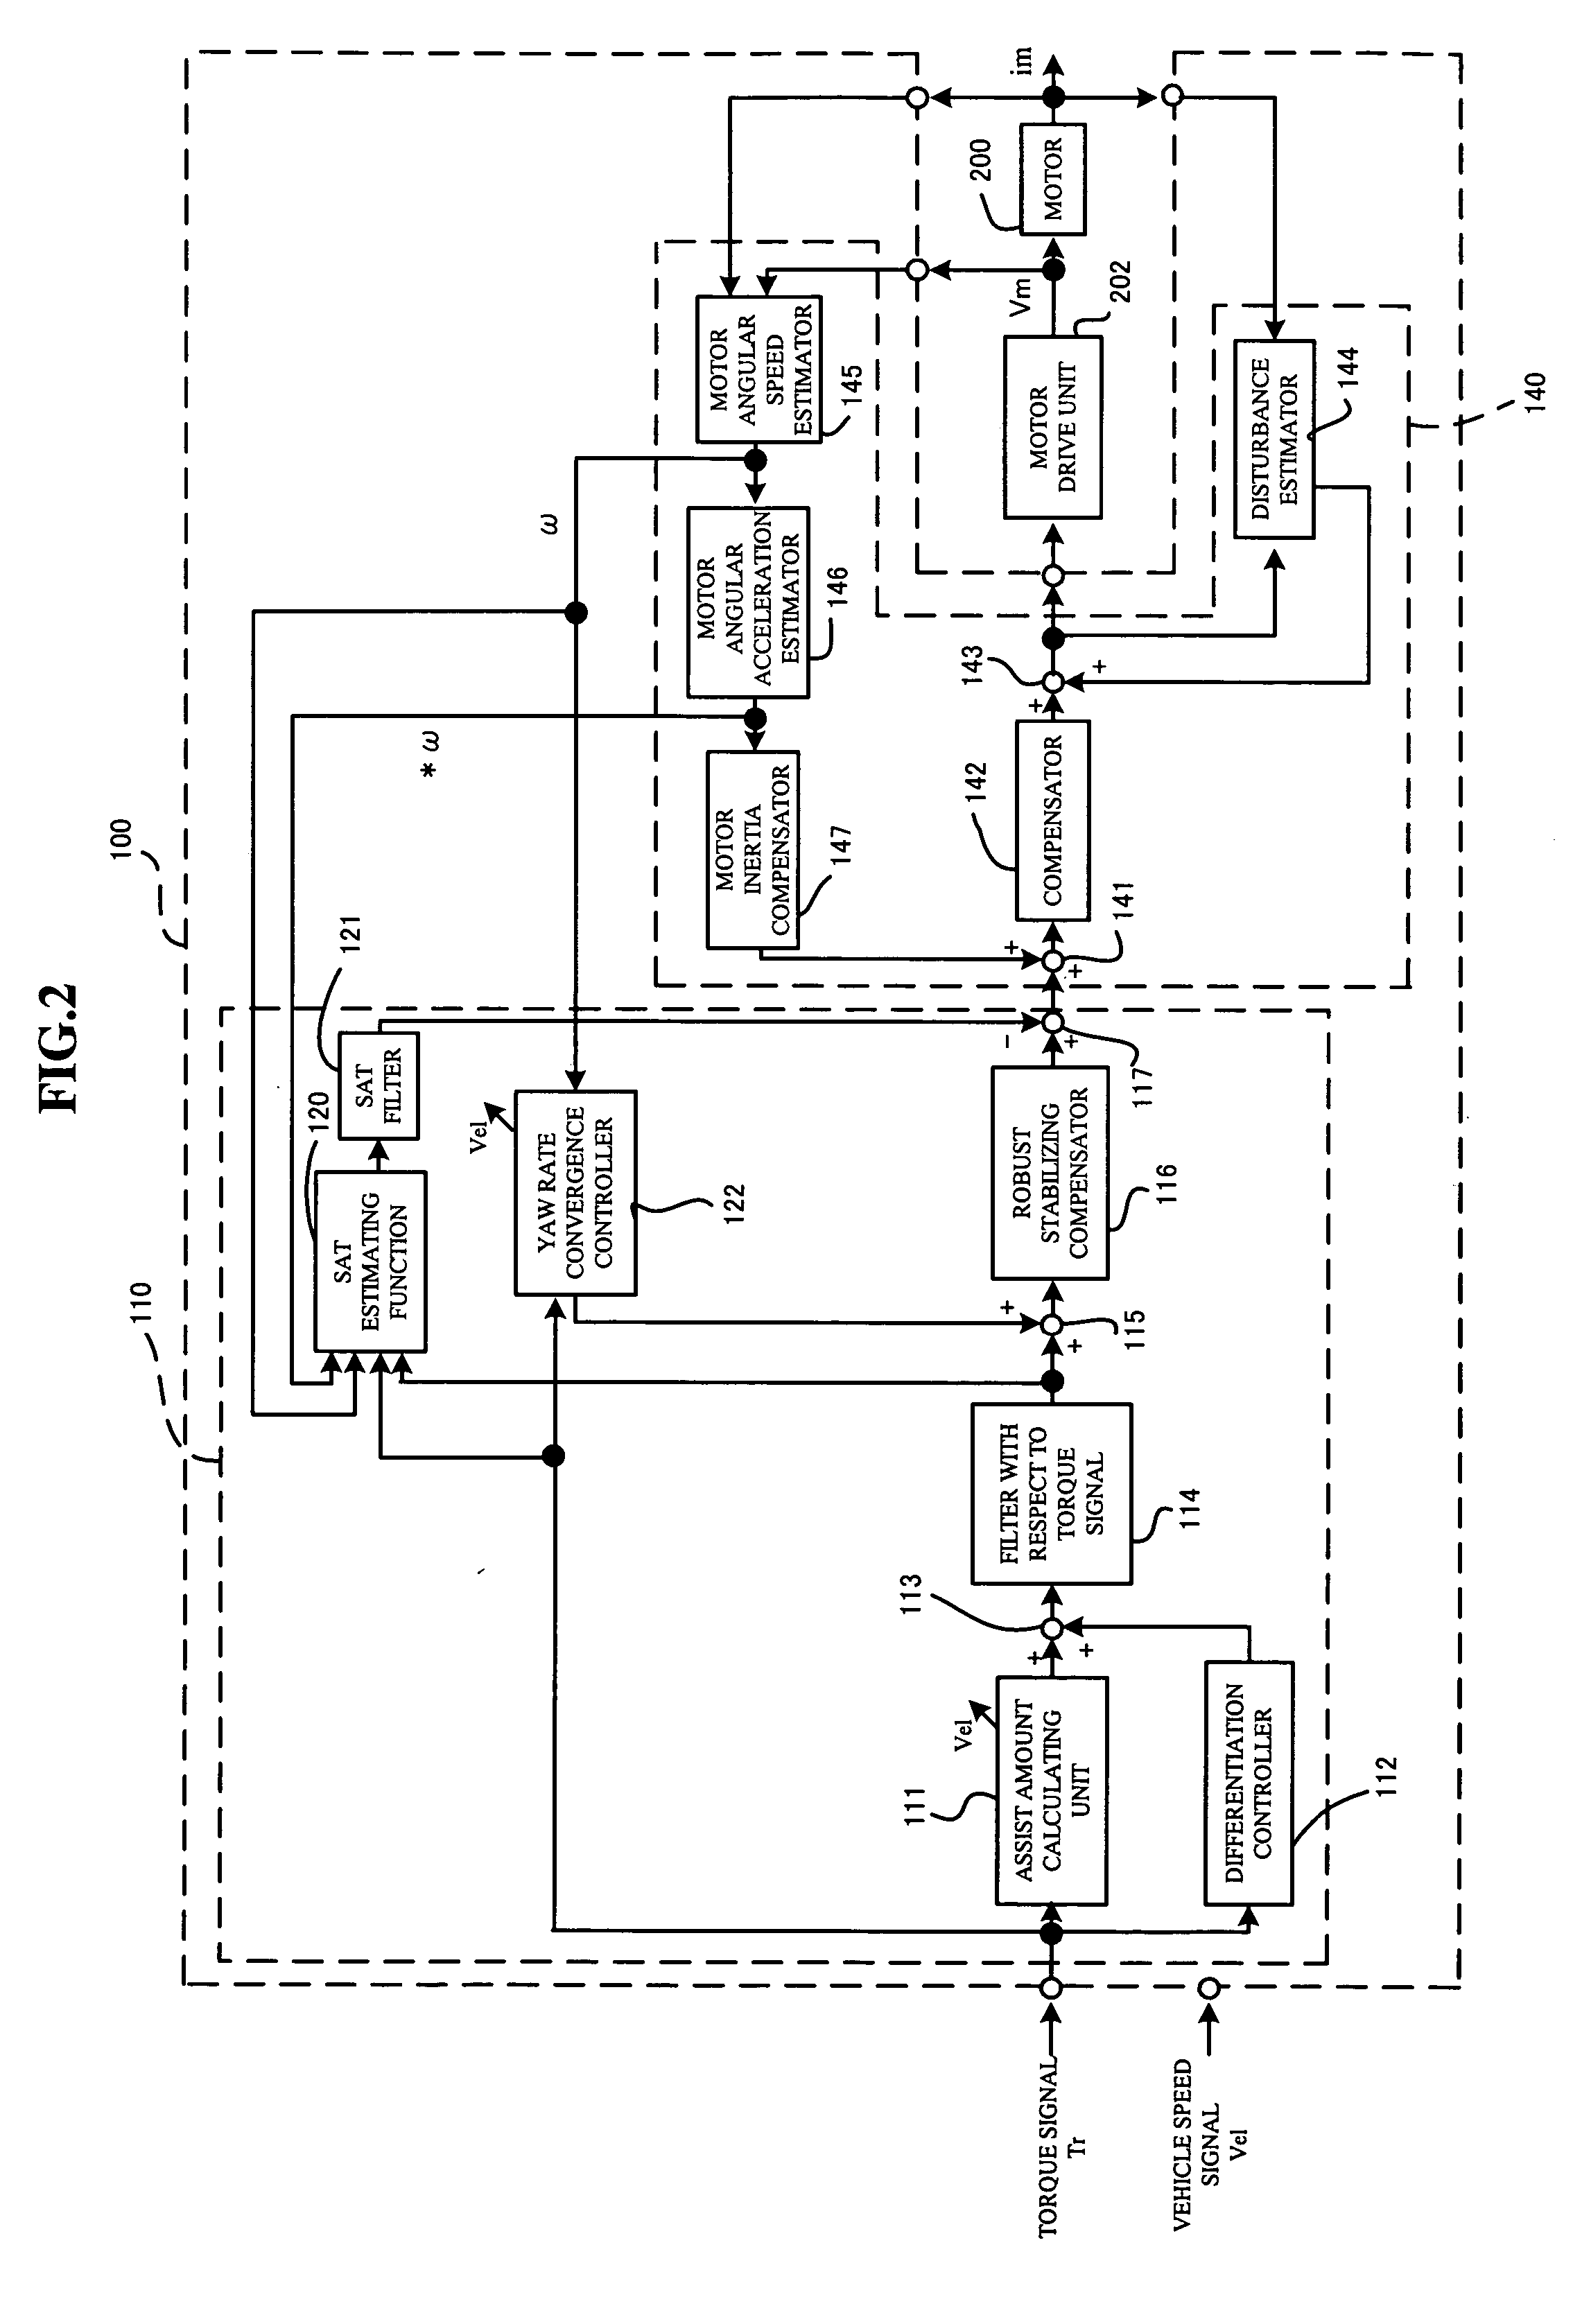 Control device for motorized power steering device